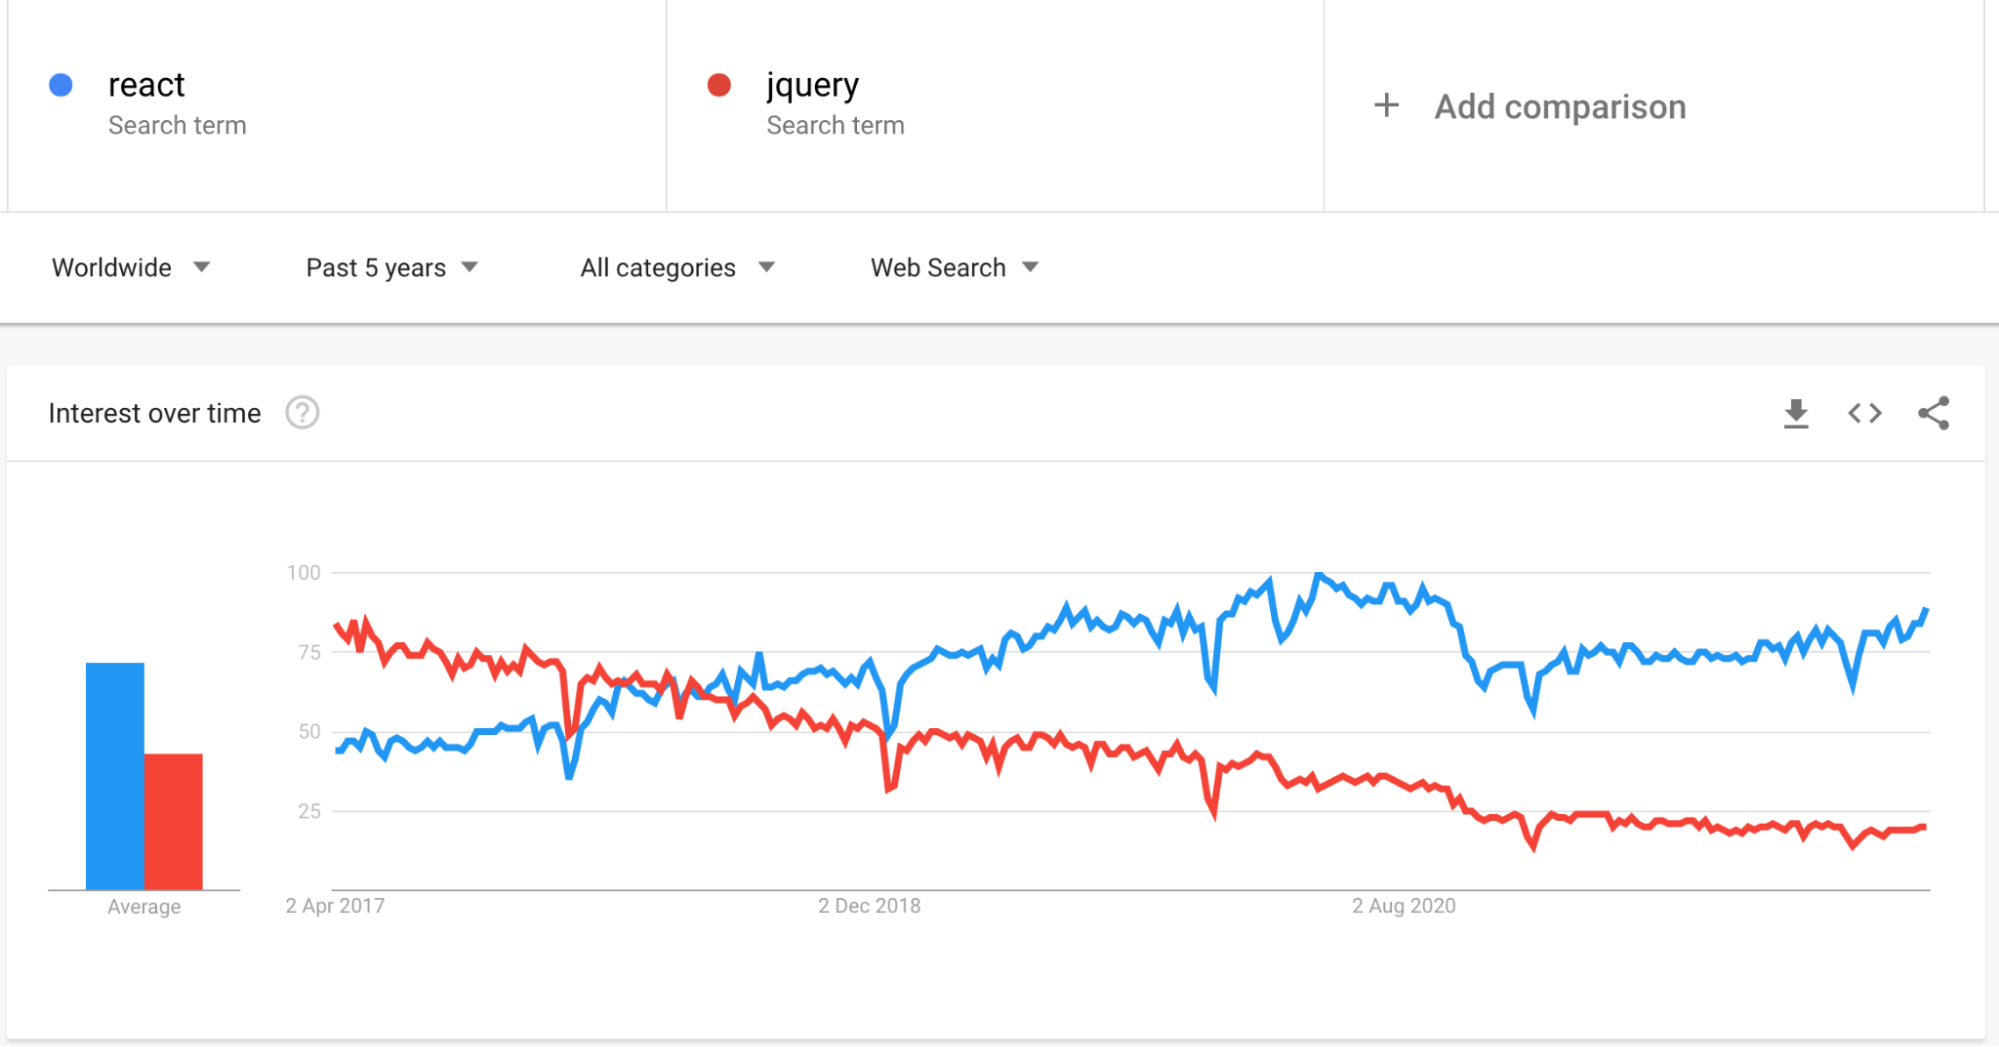 react vs jquery trends over time